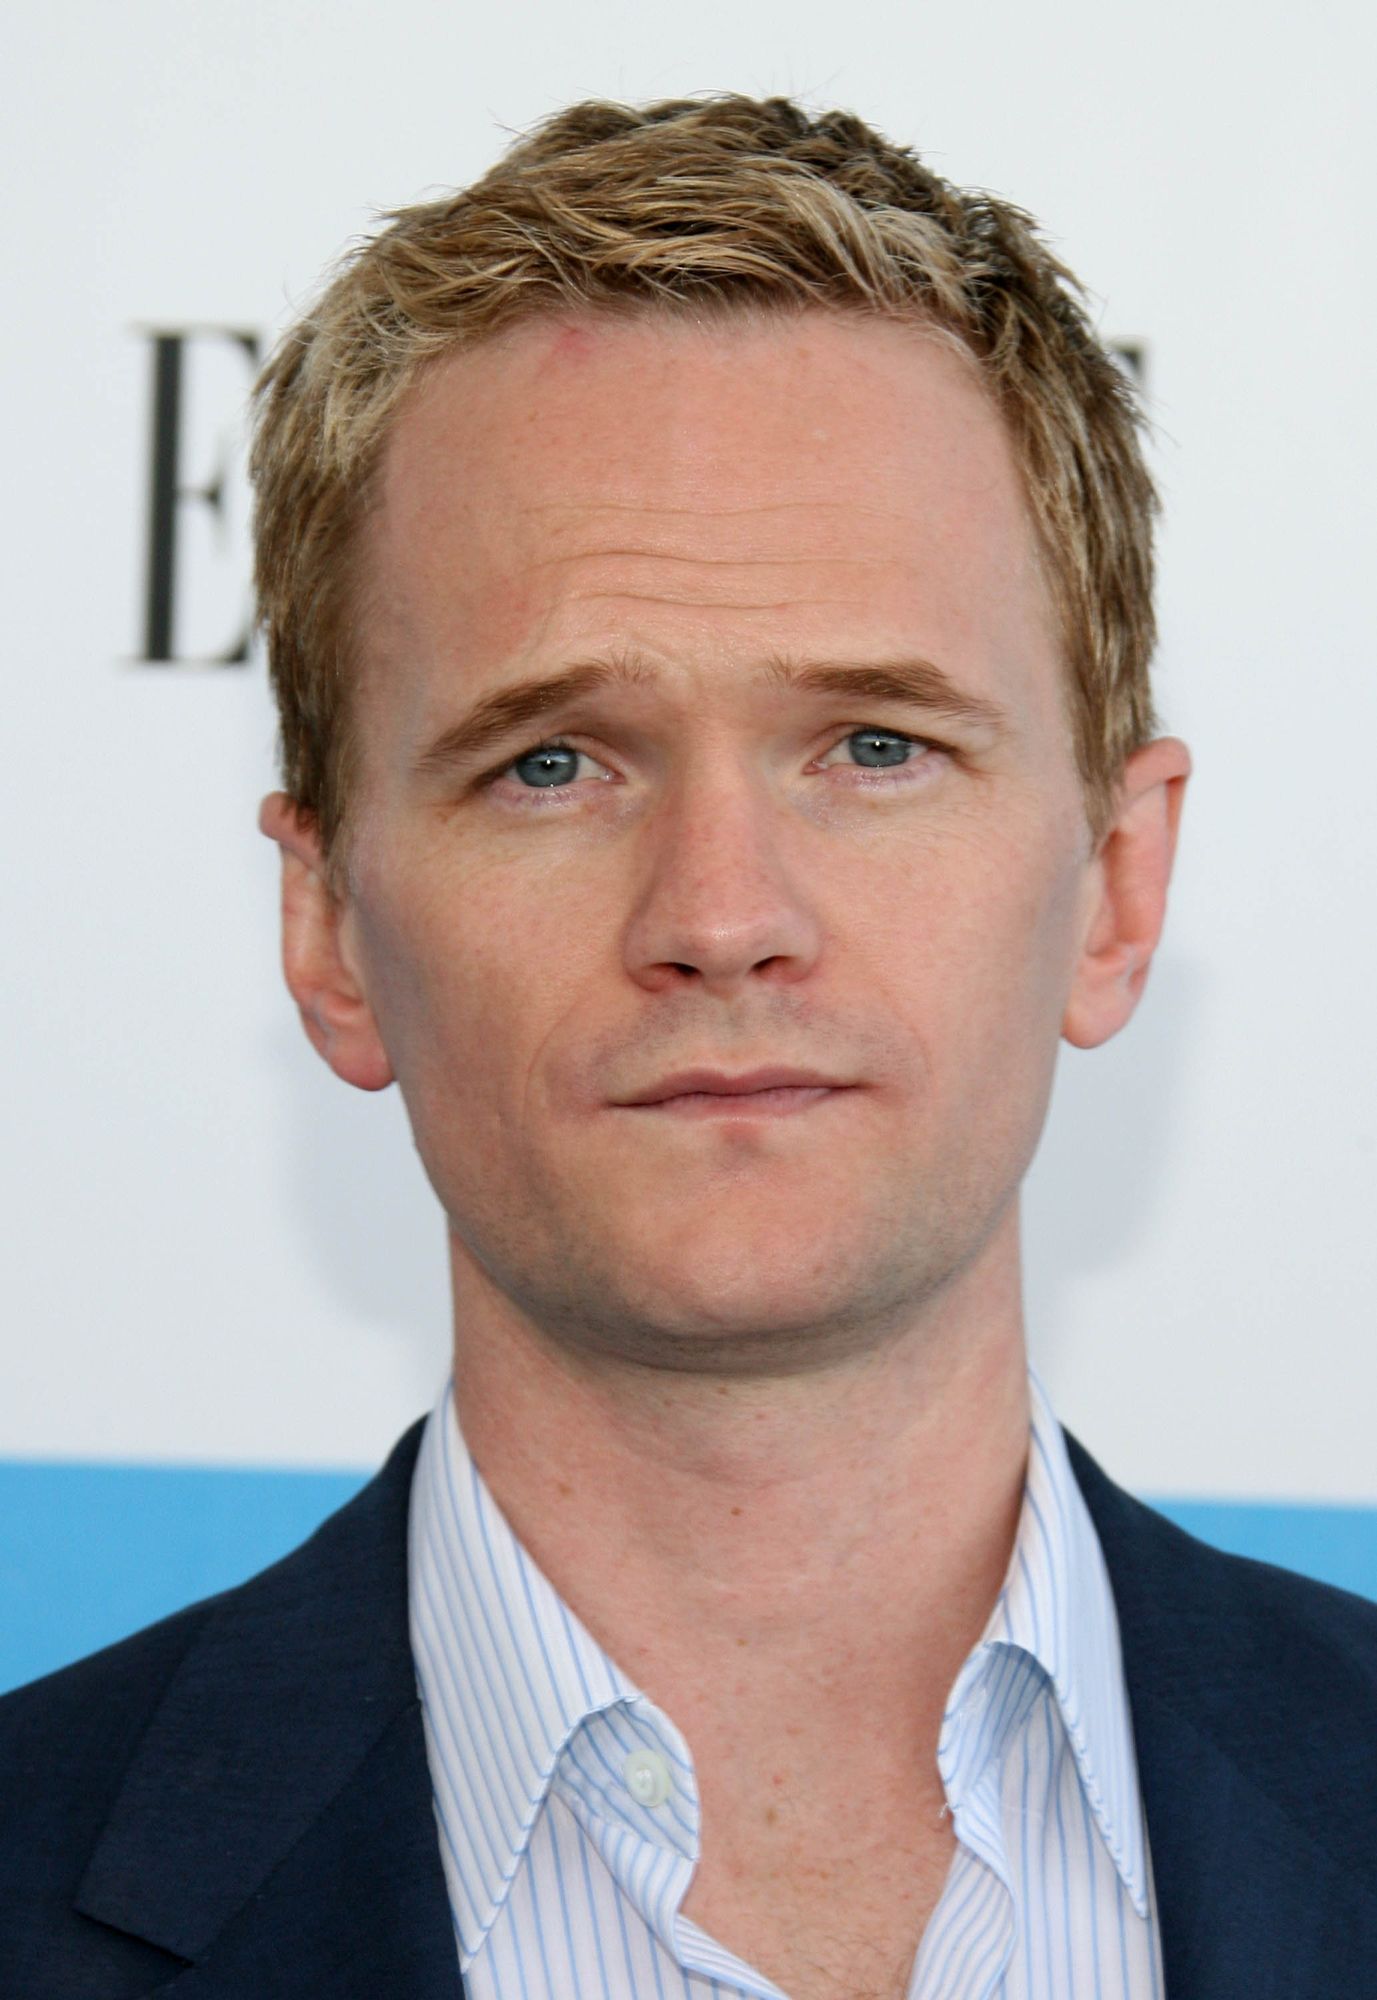 NEIL PATRICK HARRIS | Search Results | InsectAnatomy